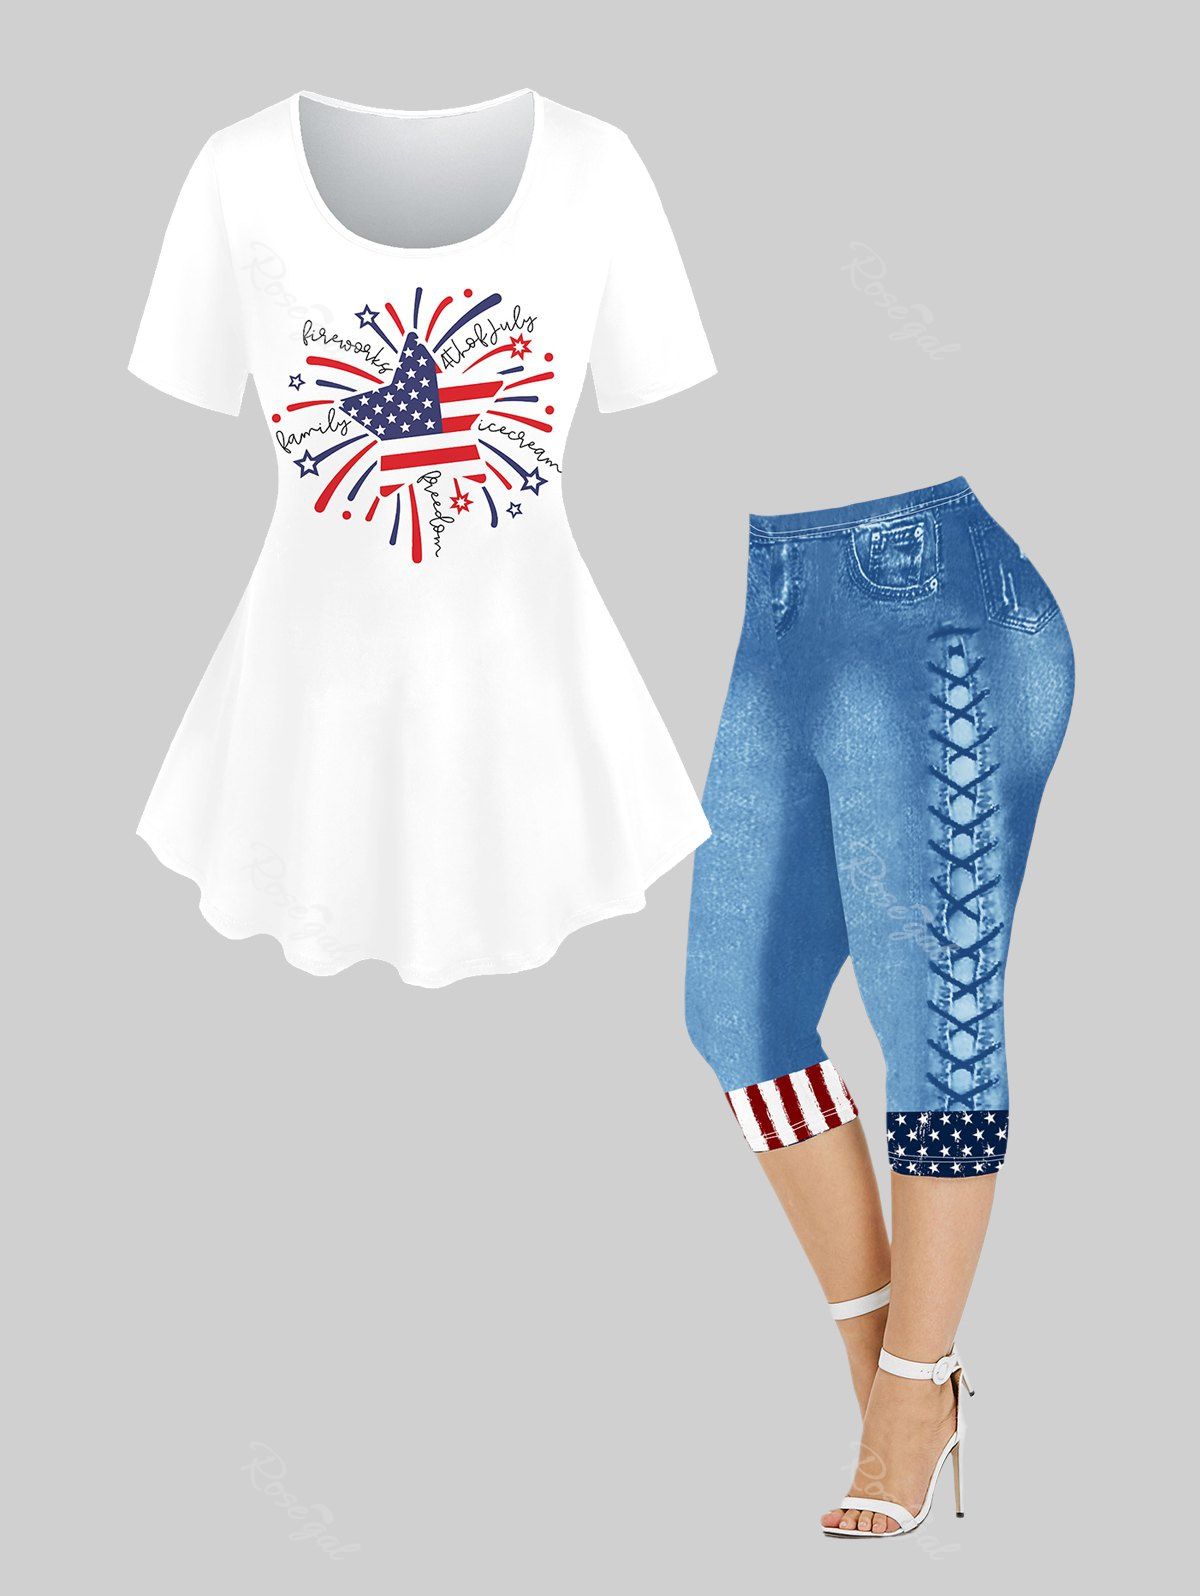 Affordable Plus Size Red White Blue American Flag And Letter Printed Short Sleeve T-Shirt and 3D Jeans Lace-up American Flag Printed Leggings Outfit  